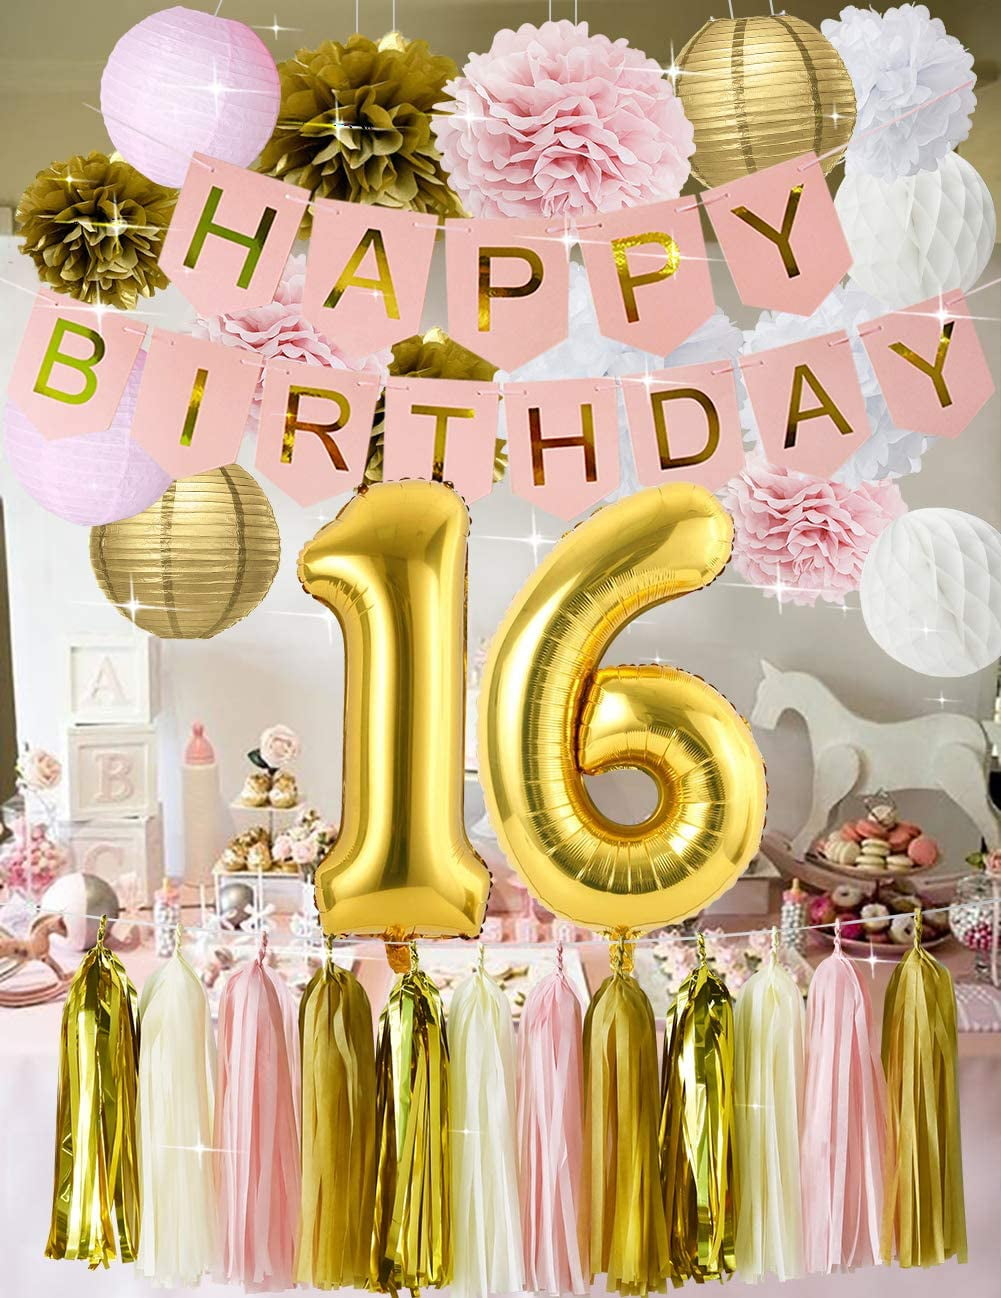 16th Birthday Party Decorations Pink Gold Birthday Decorations for Girls Happy Birthday Banner Paper Party Decorations Gold 16 Foil Balloons 16th Bday Decorations 16 Birthday Party Supplies